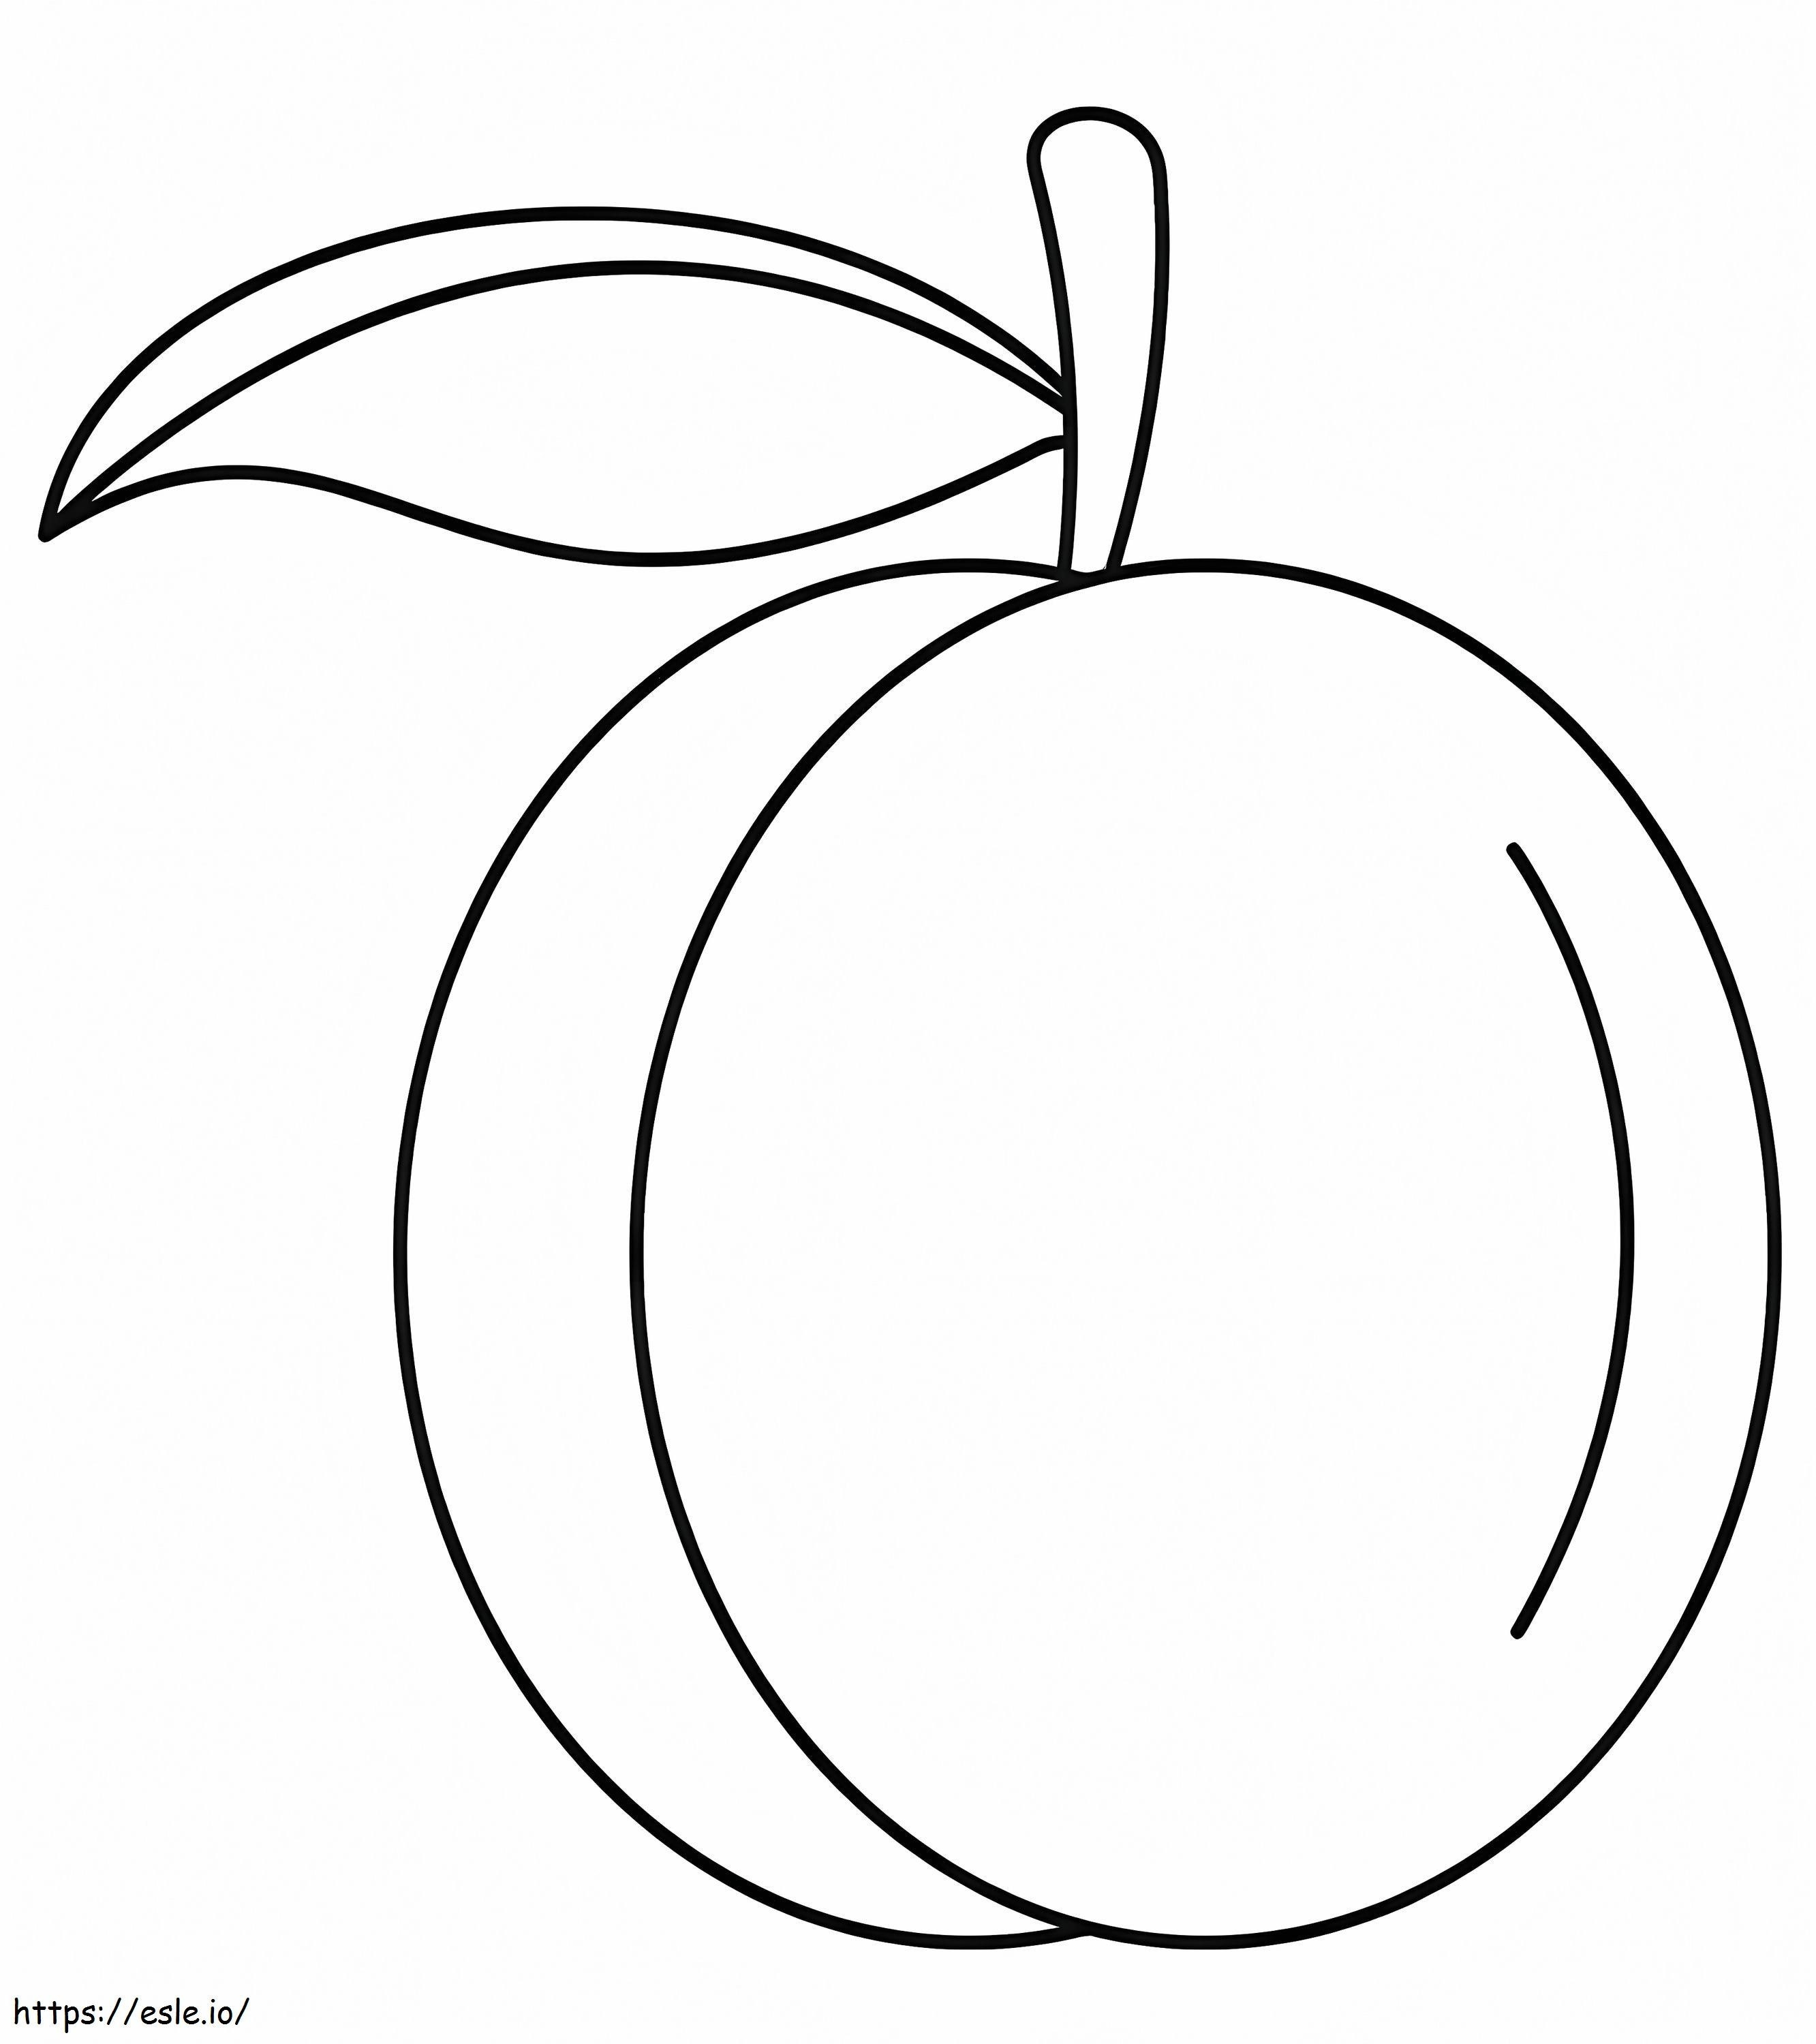 Simple Peach Fruit 2 coloring page